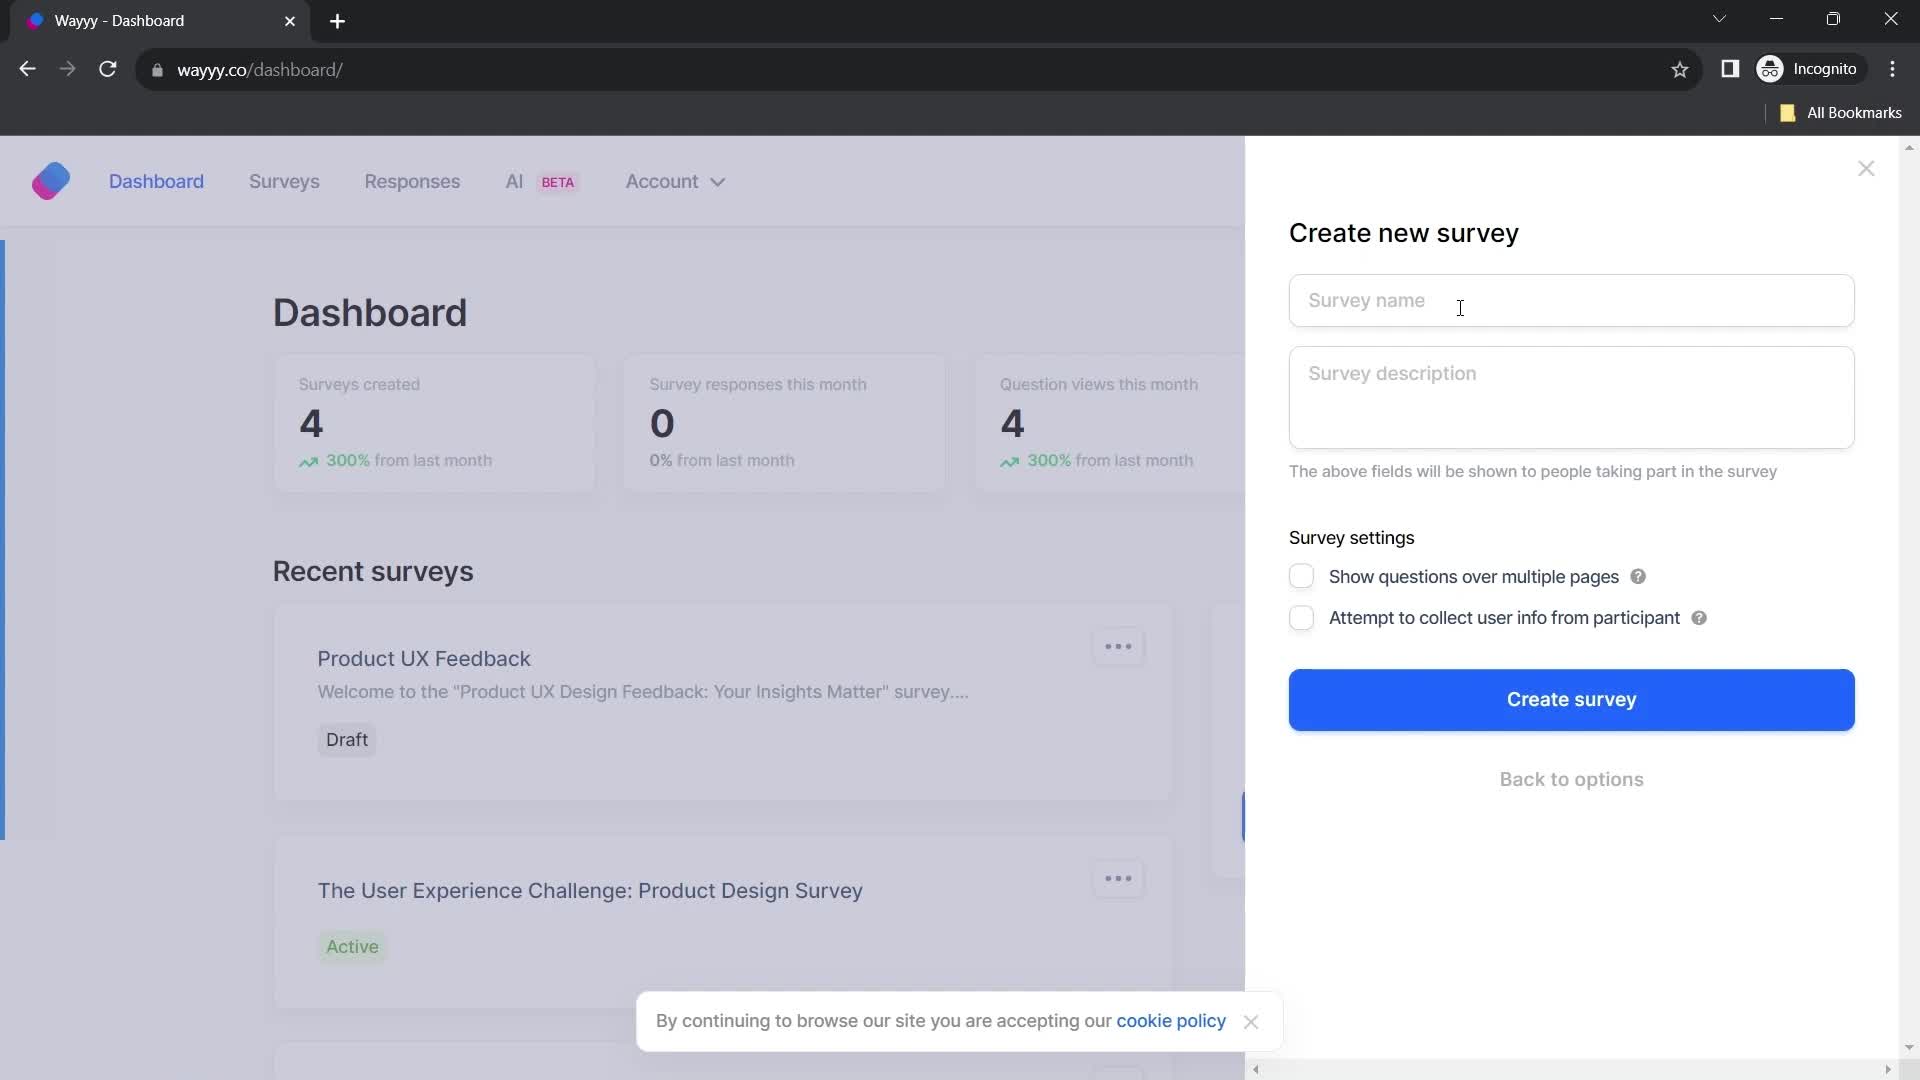 Screenshot of Add survey details on Creating a survey on Wayyy user flow